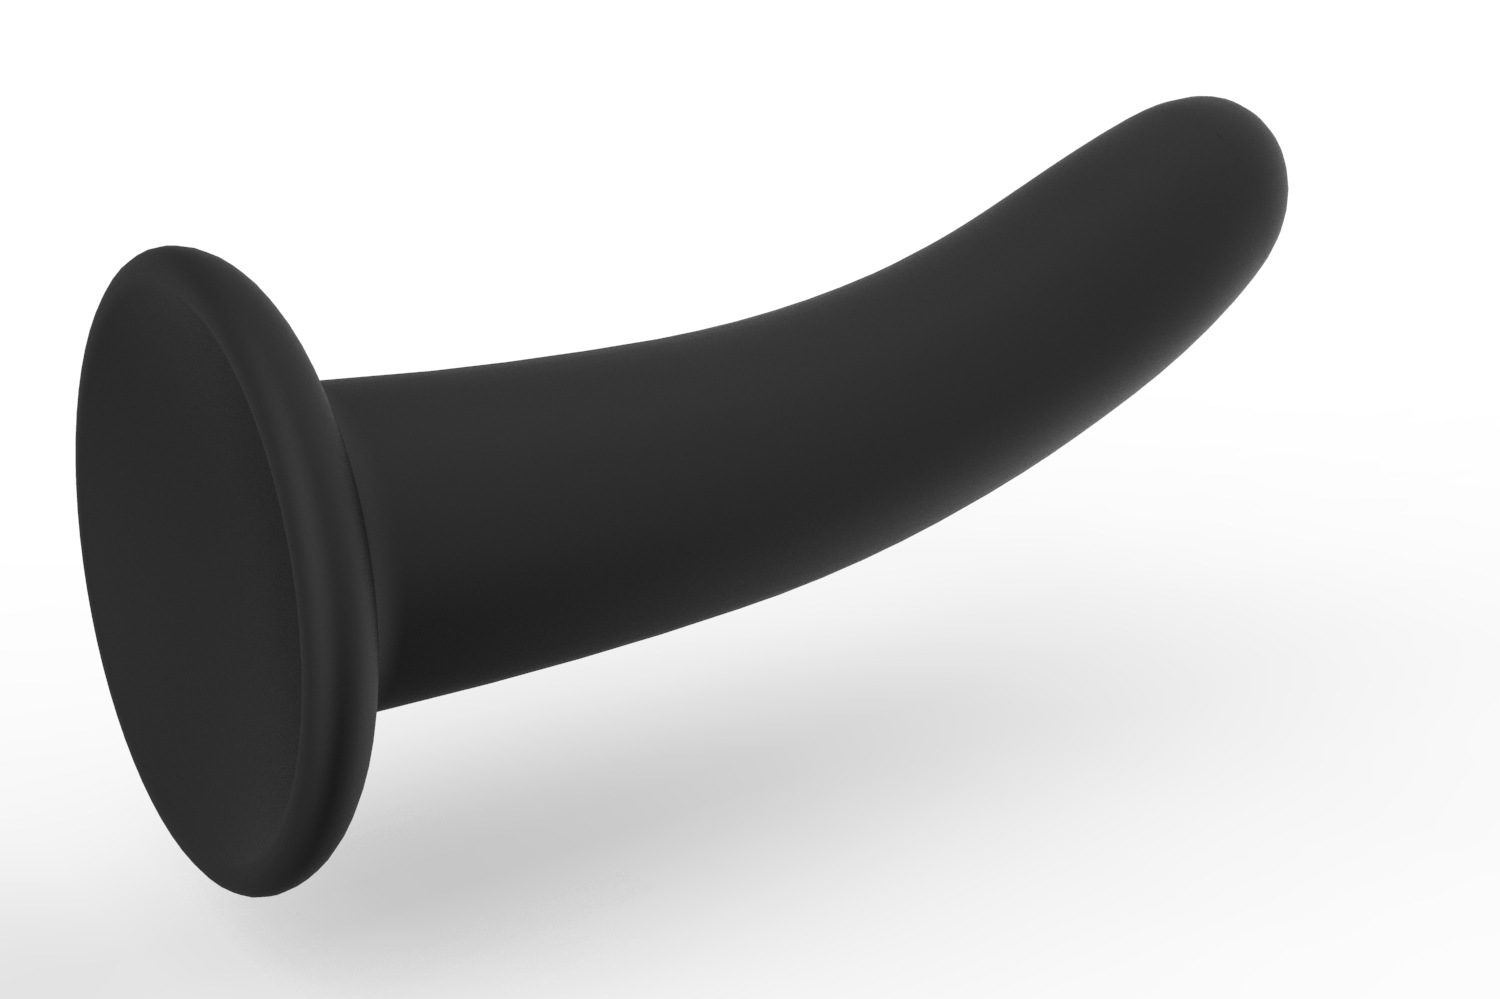 Silicone extended anal plug wiht suction cup